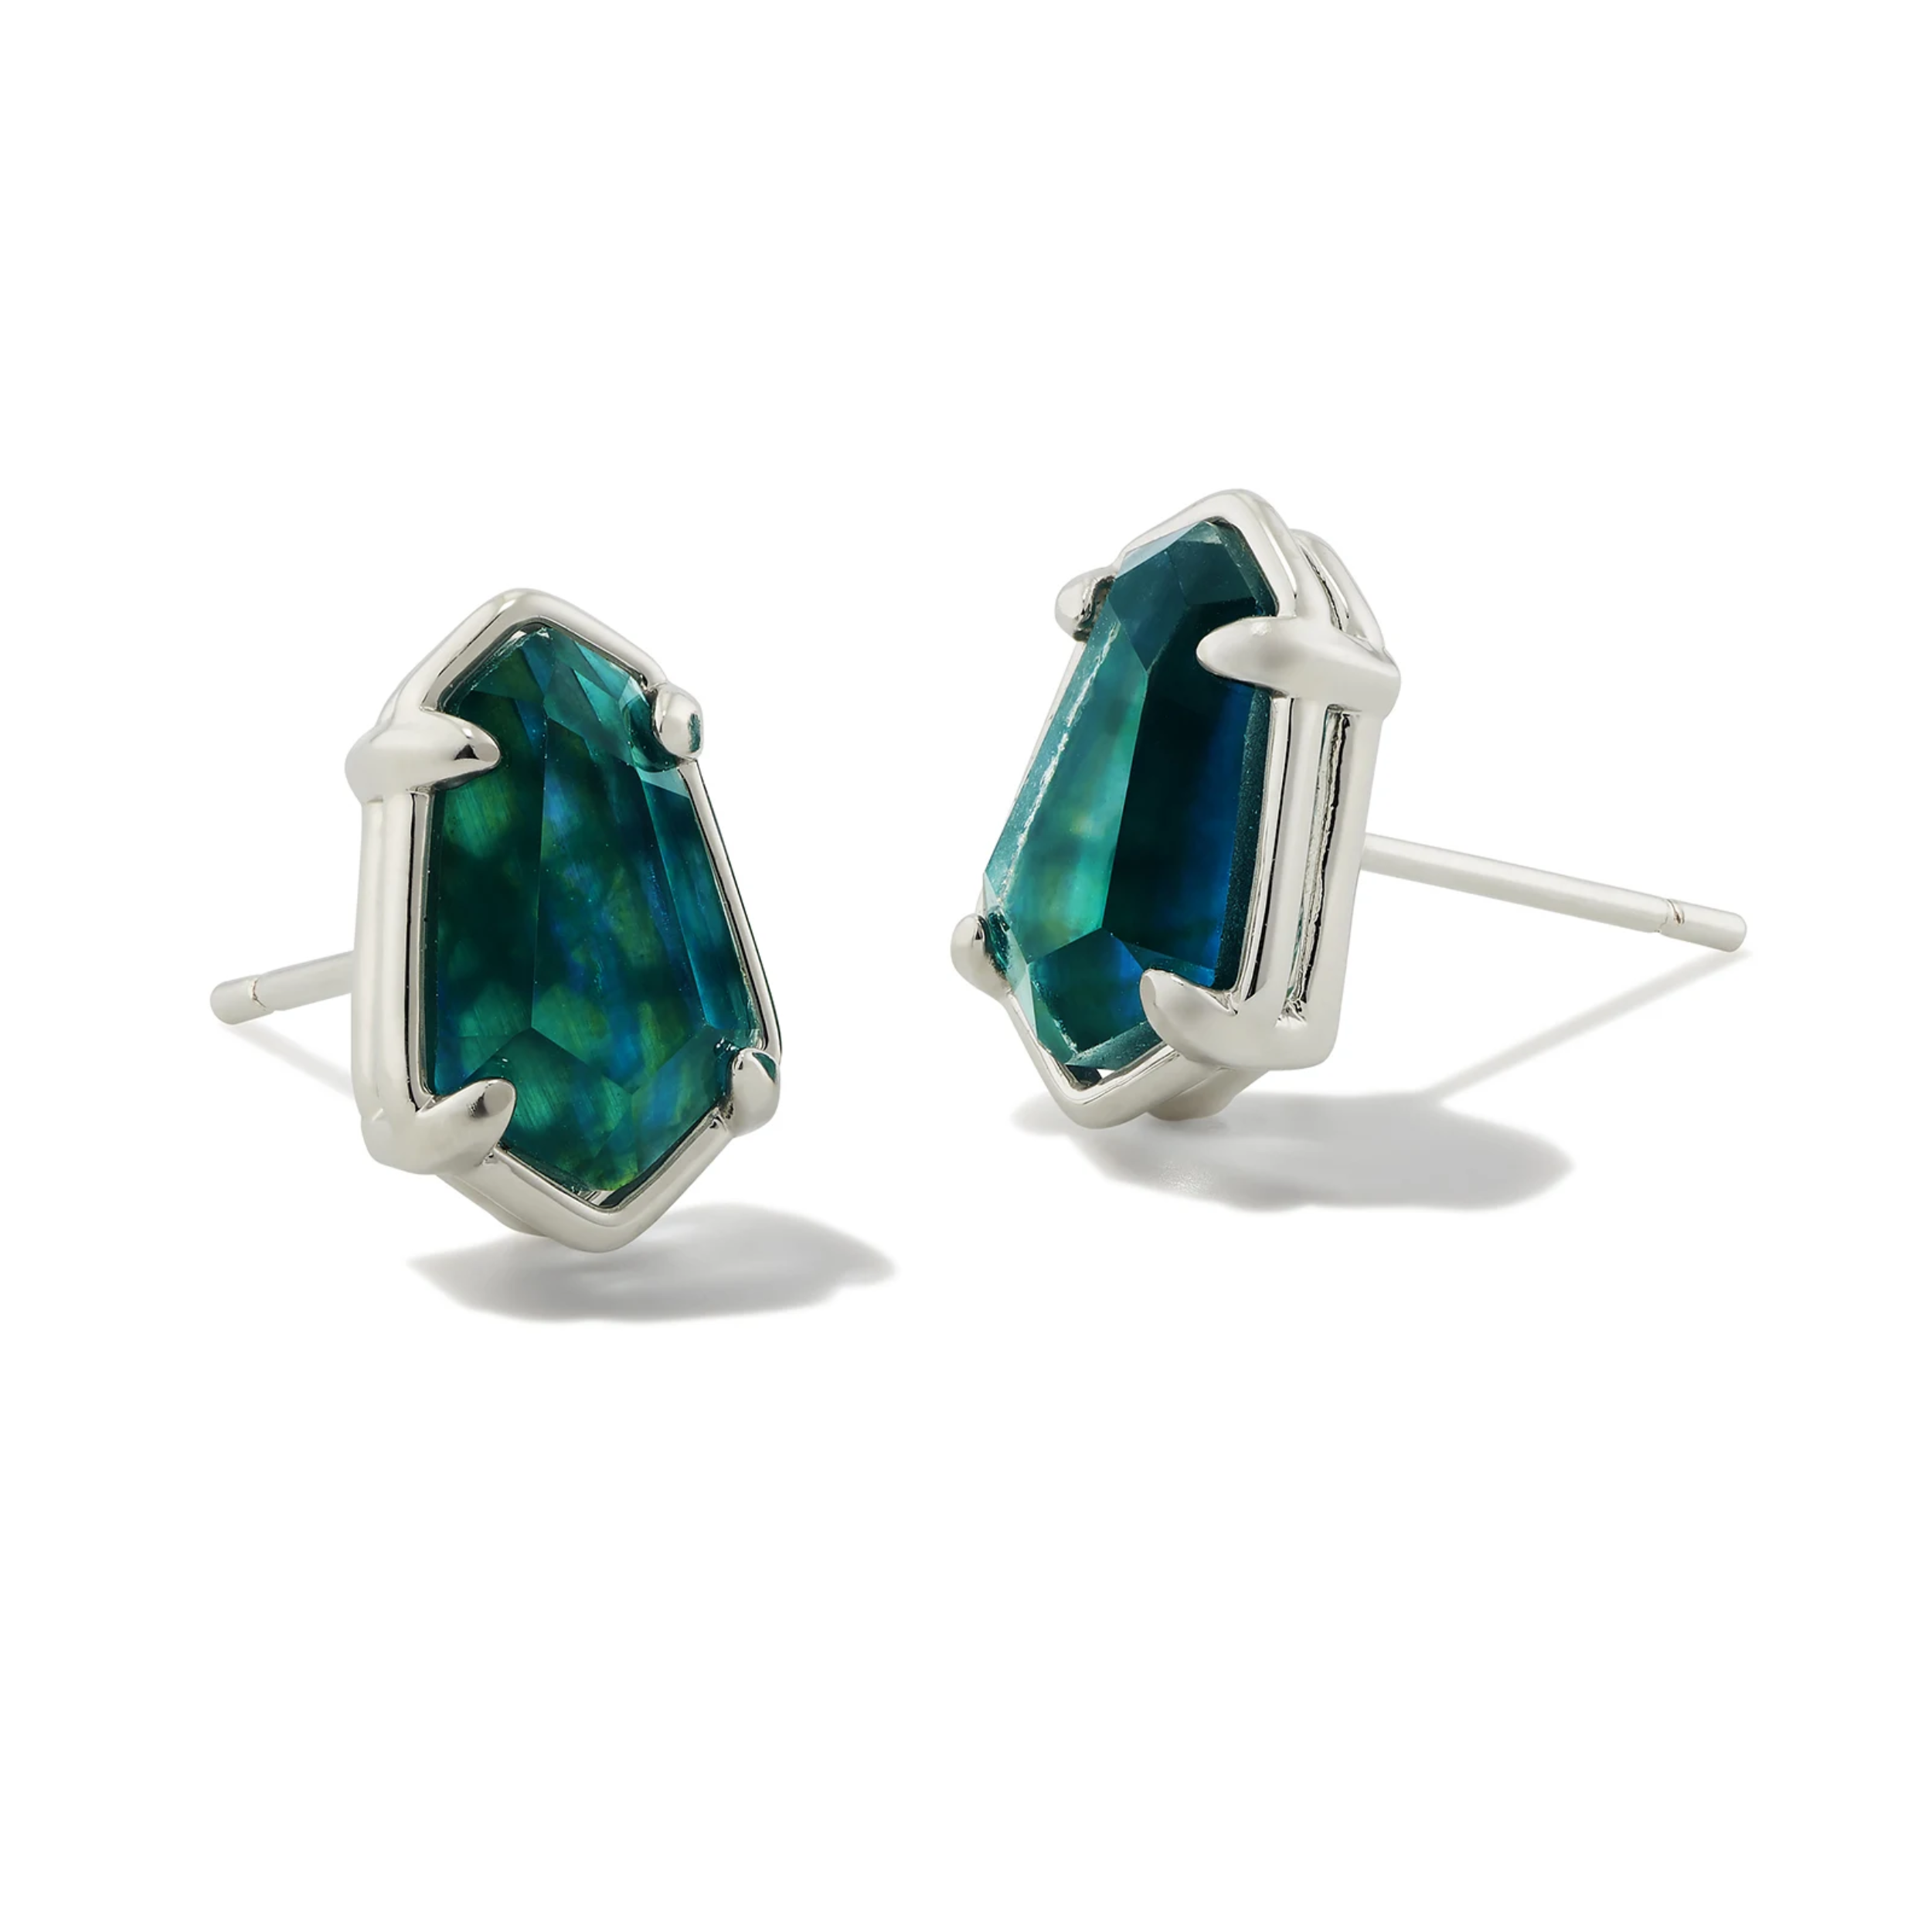 These Alexandria Silver Stud Earrings in Teal Green Illusion by Kendra Scott are pictured on a white background.